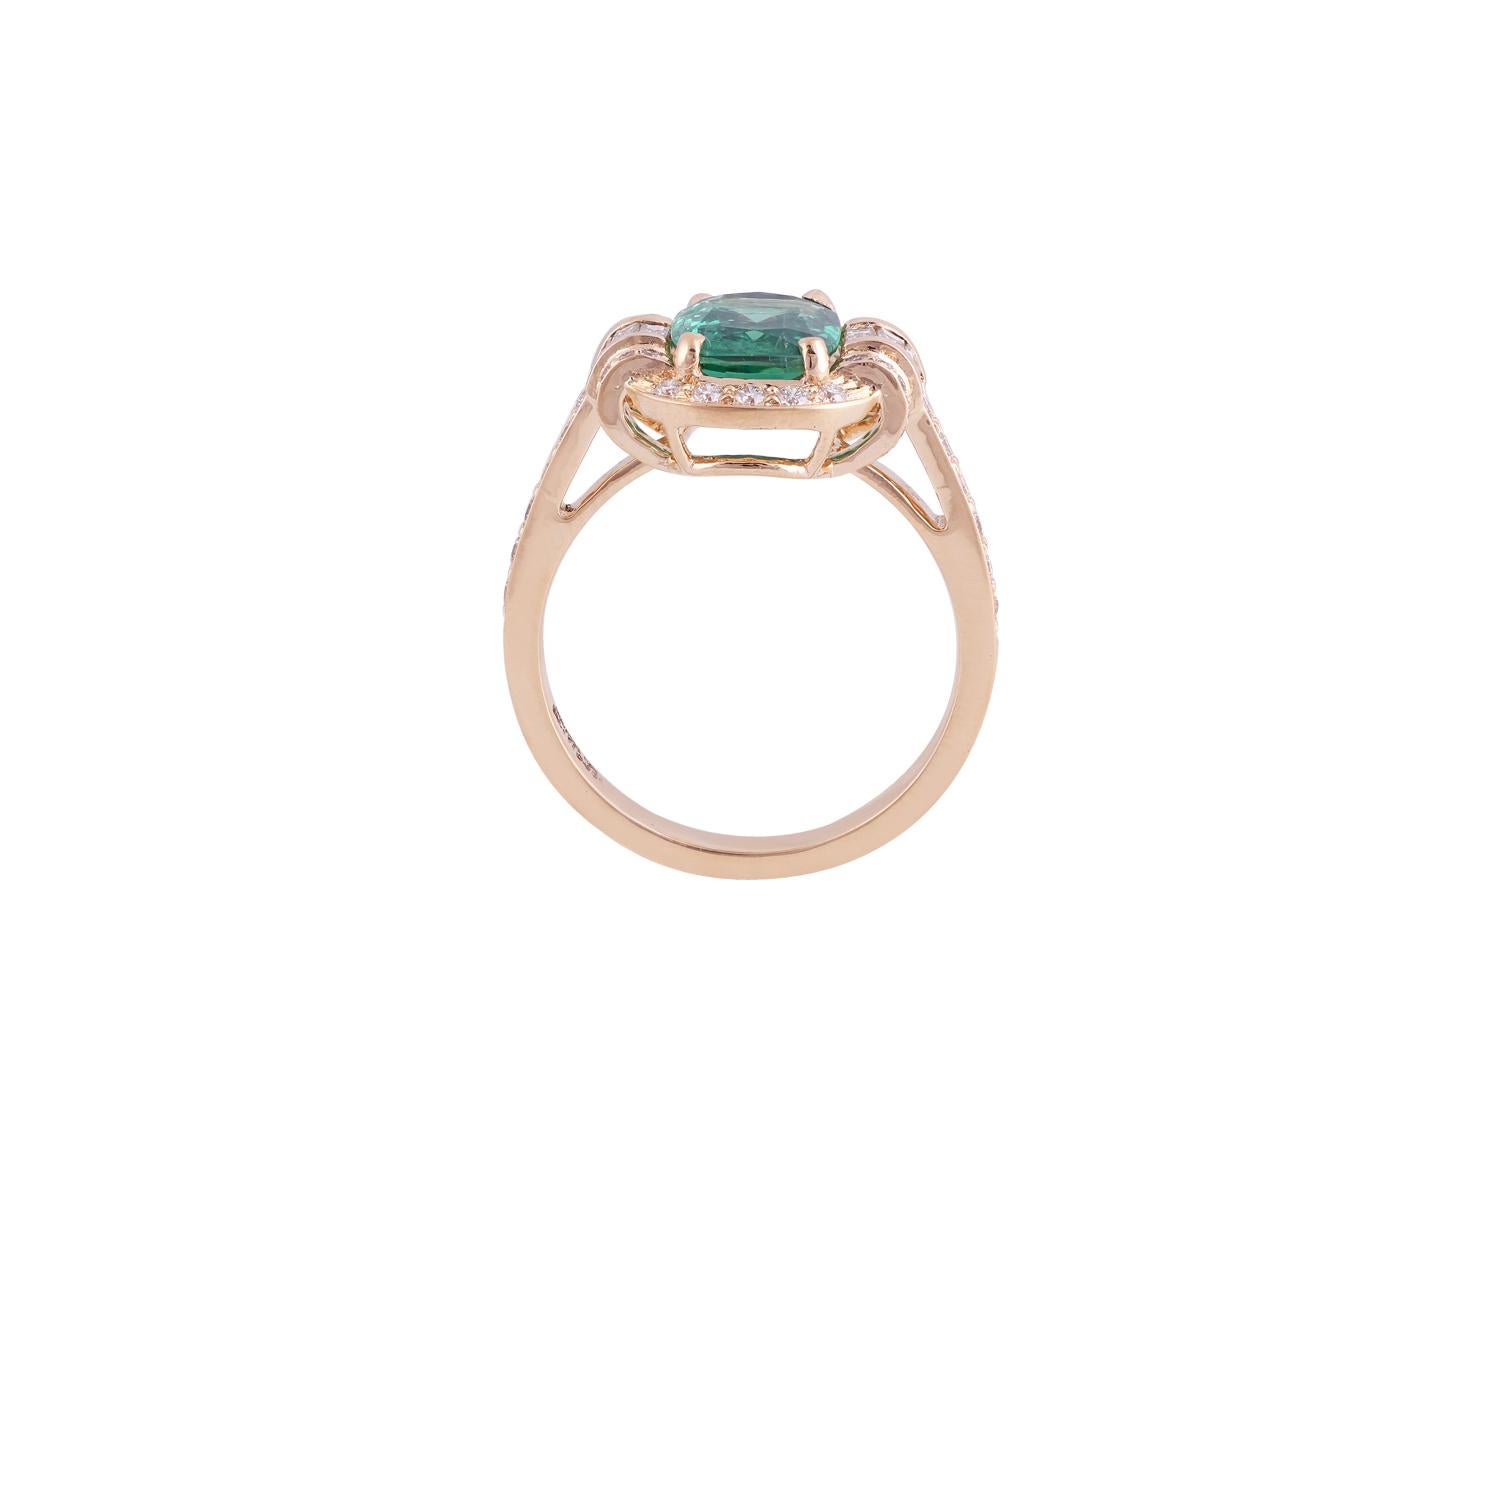 Its an elegant ring studded in 18k yellow gold with 1 cushion shaped emerald weight 1.71 carat setted in the center with 6 baguette shaped diamonds weight 0.20 carat & 46 round shaped diamonds weight 0.31 carat, this entire ring studded in 18k